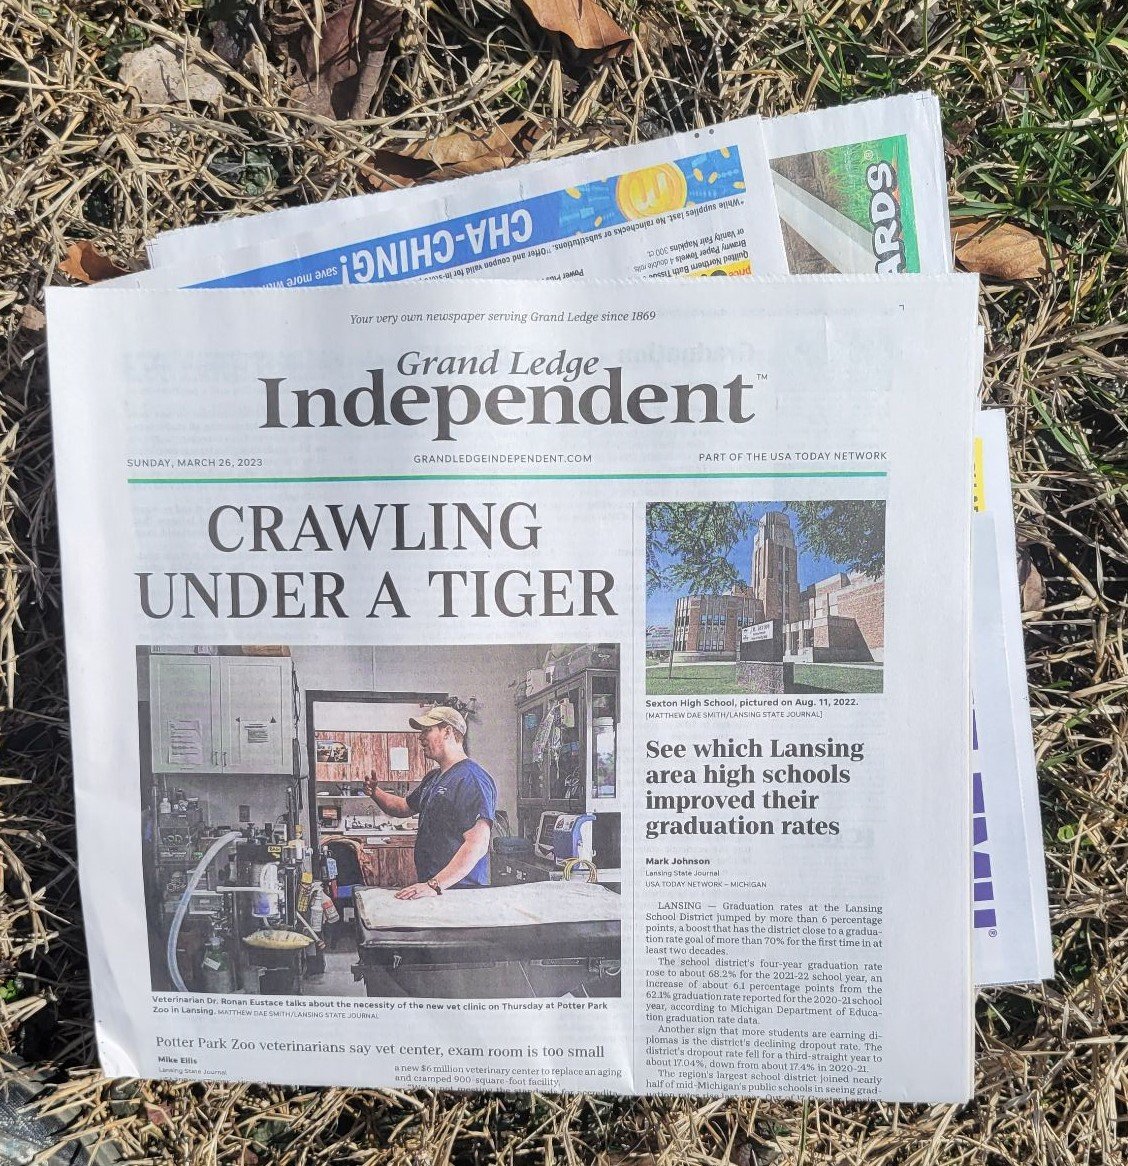 A copy of the last edition of the Grand Ledge Independent, one of a dozen weeklies in and around Lansing that Gannett purchased 19 years ago — all of which have ceased publication. The Independent, which traced its history to 1869, had been published weekly since 1938.